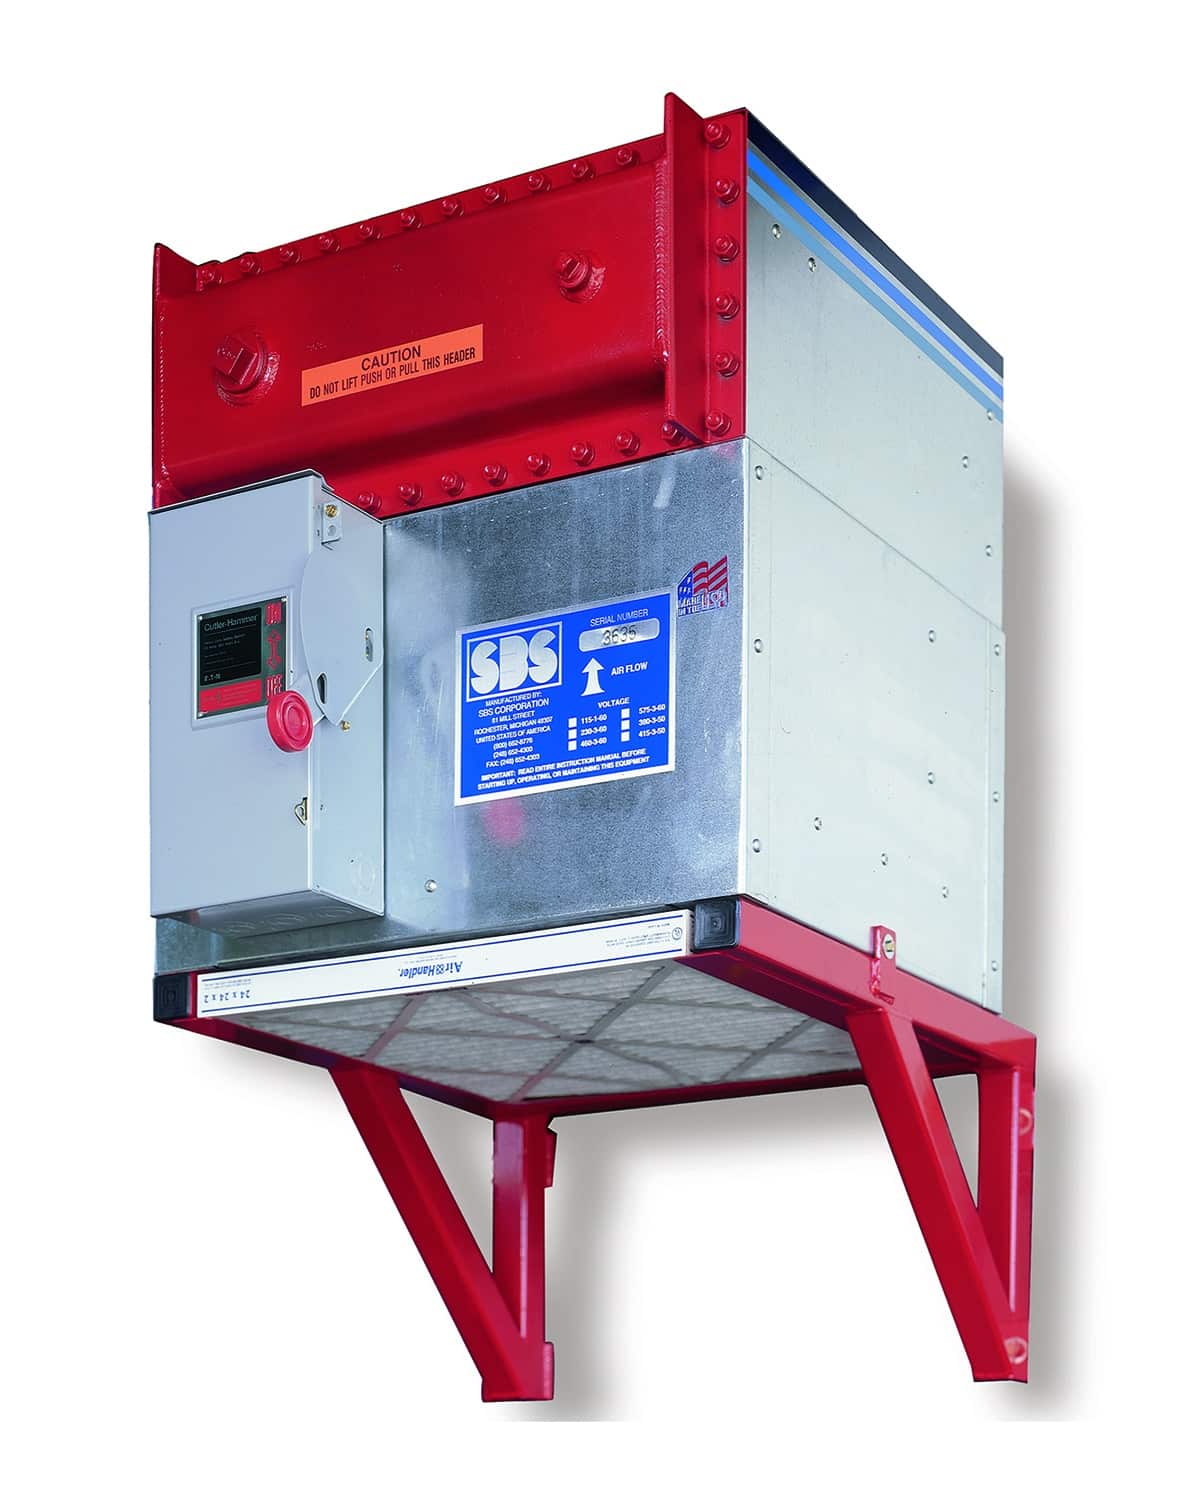 SBS End-O-Therm Generator Cooler